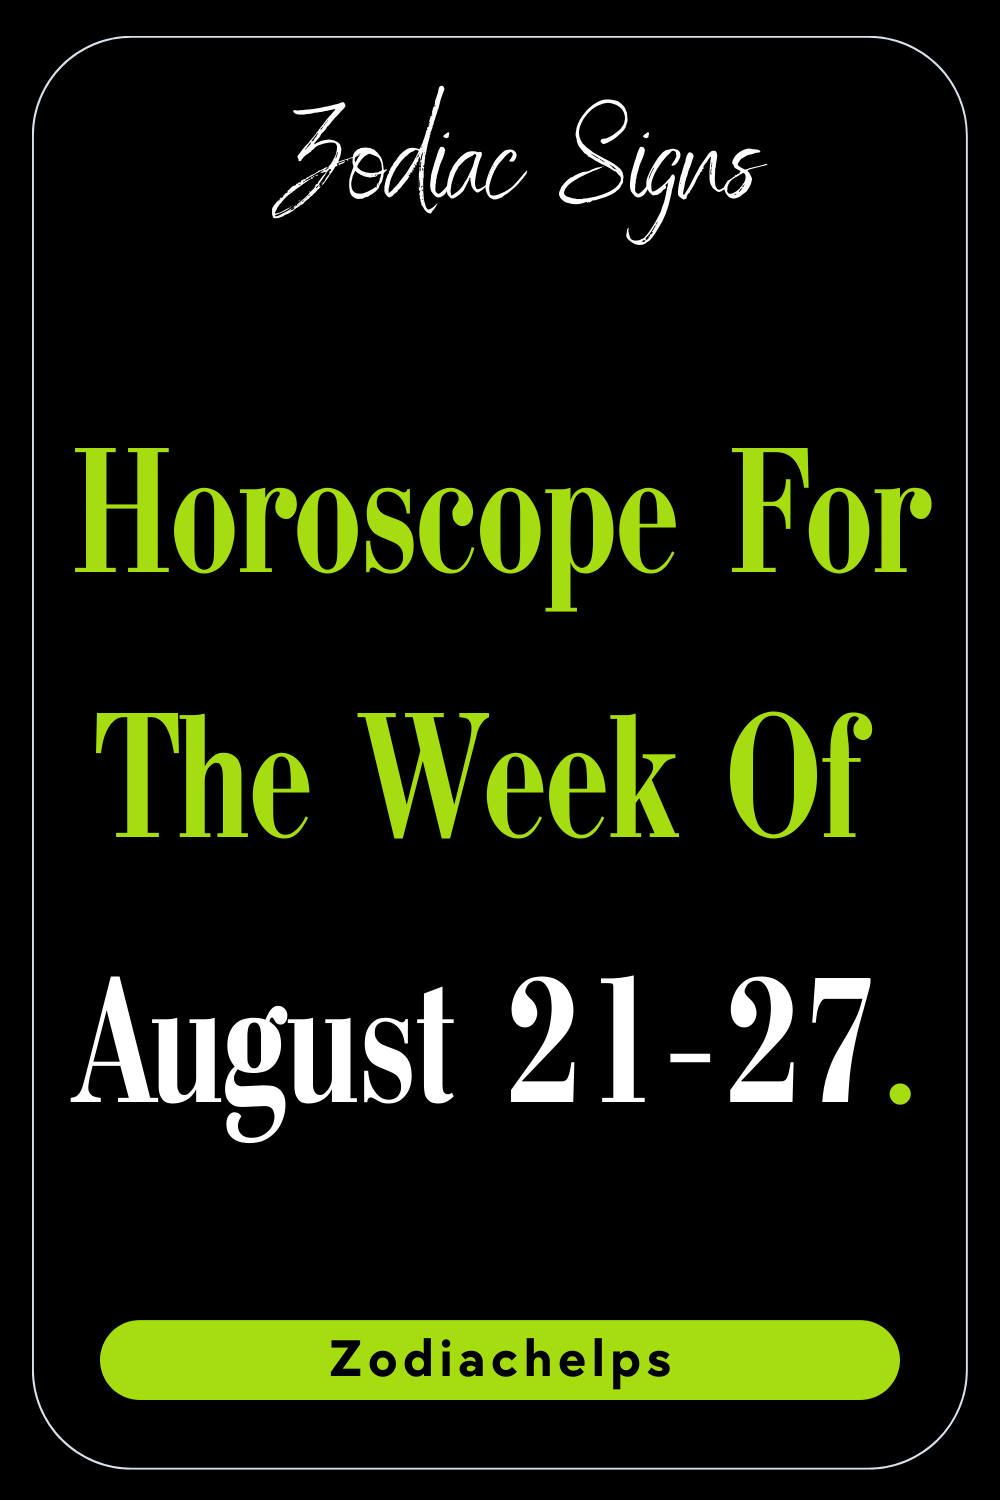 Horoscope For The Week Of August 21-27.